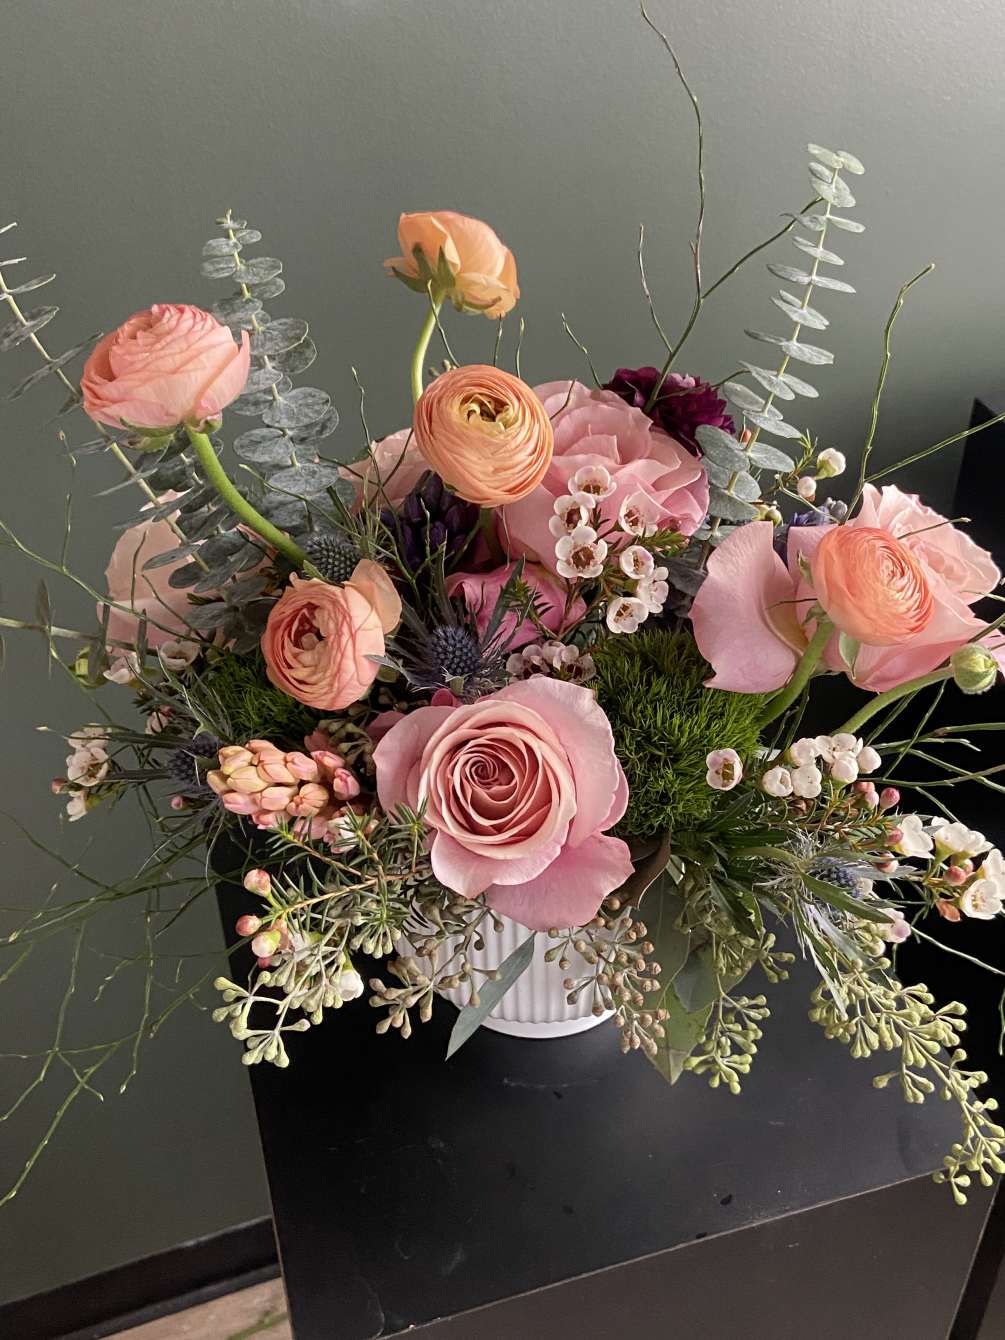 The Wild Ranunculus contained a beautiful assortment of ranunculus, Roses, Wax Flower